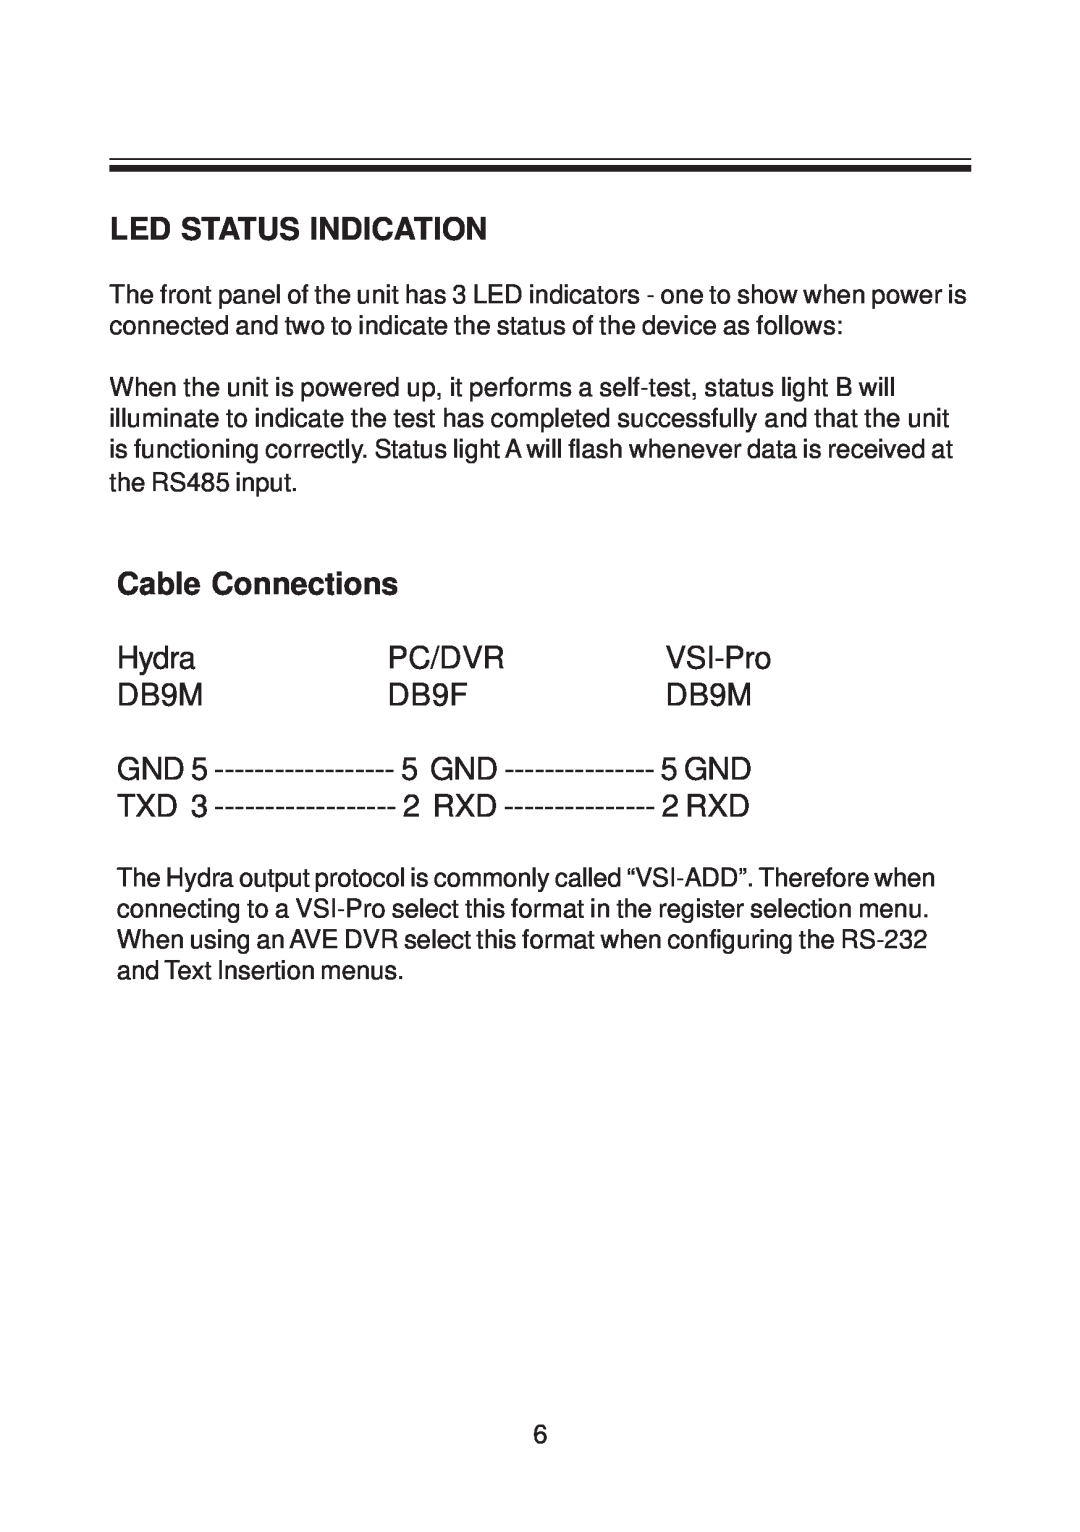 AVE RS-485 operation manual Led Status Indication, Cable Connections, Hydra, Pc/Dvr, VSI-Pro, DB9M, DB9F, 5 GND, 2 RXD 